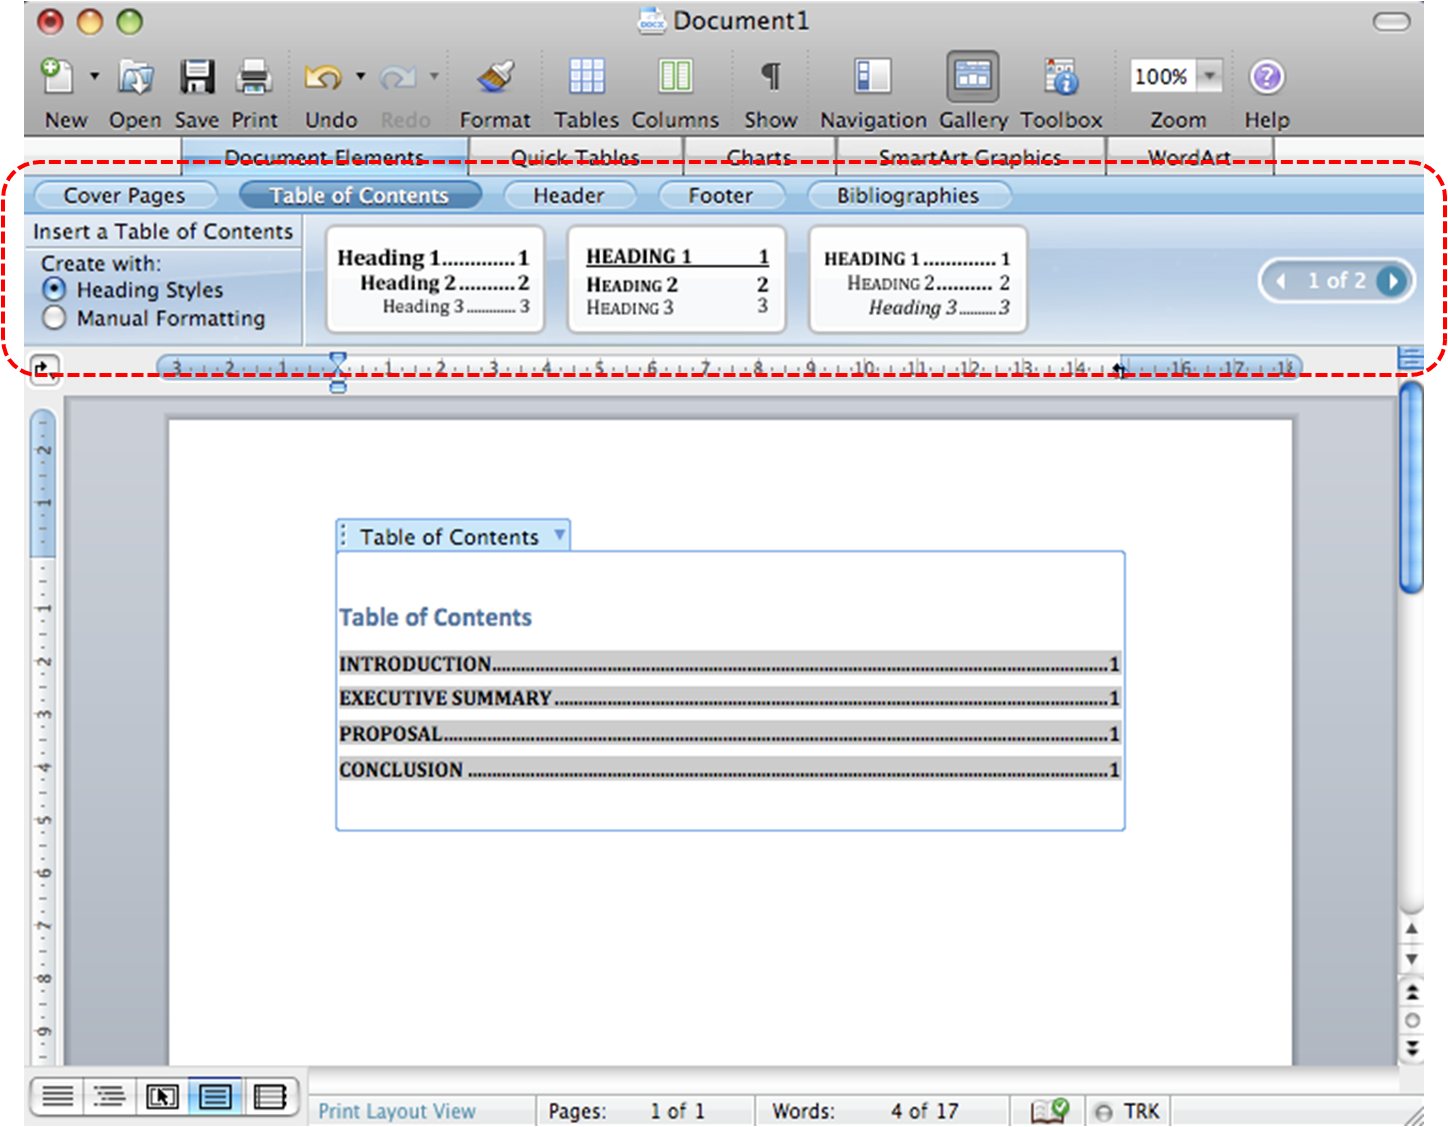 Image demonstrates location of Table of Contents section above the document pane in the application window.